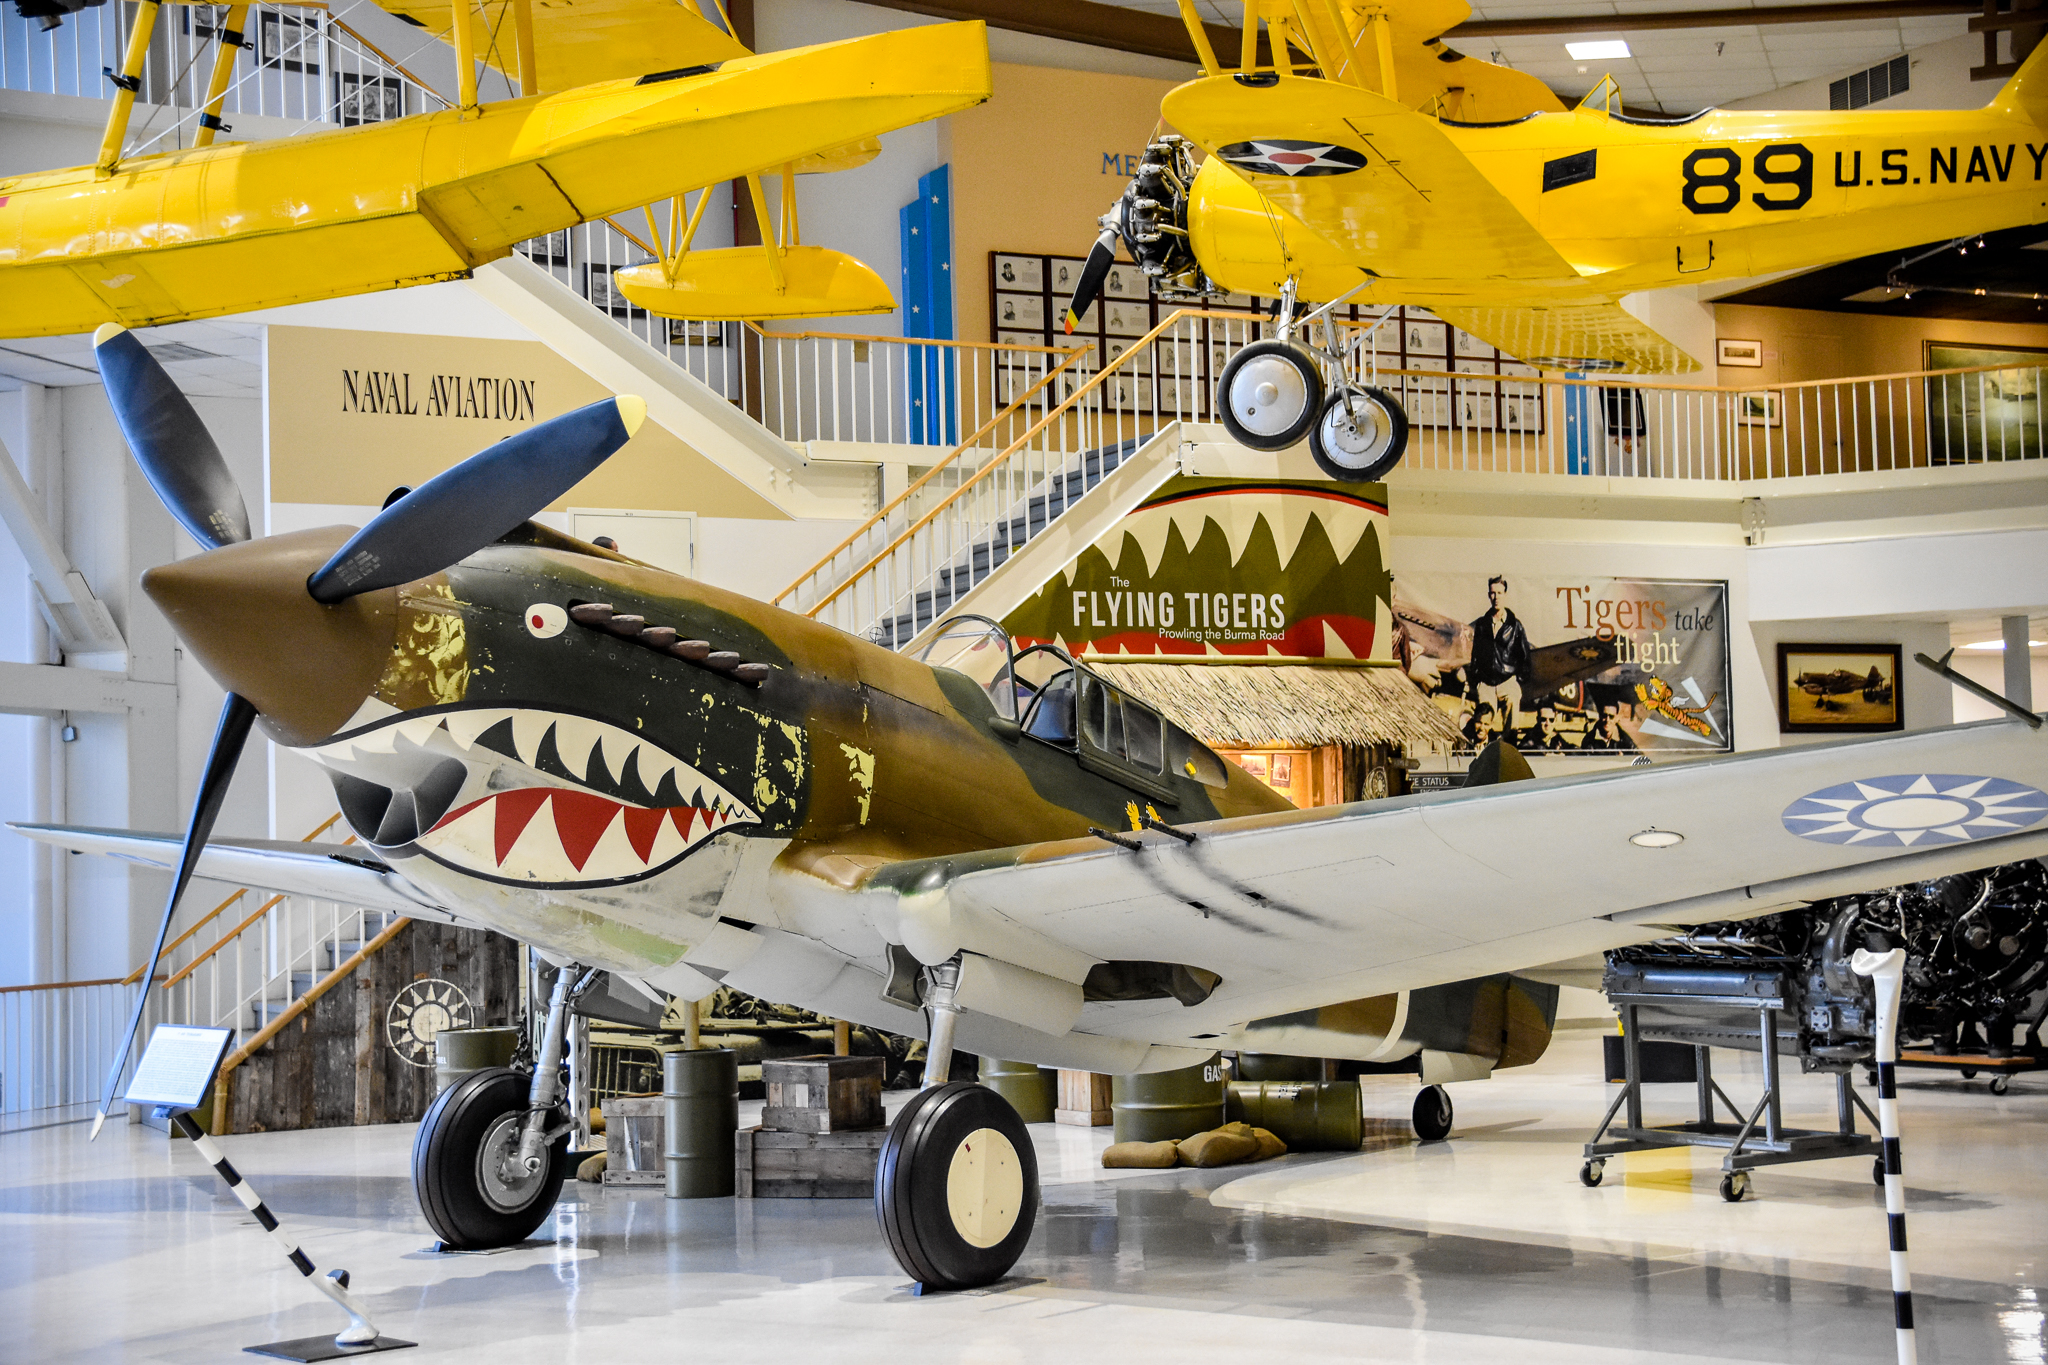 P-40B Tomahawk fighter with the shark mouth